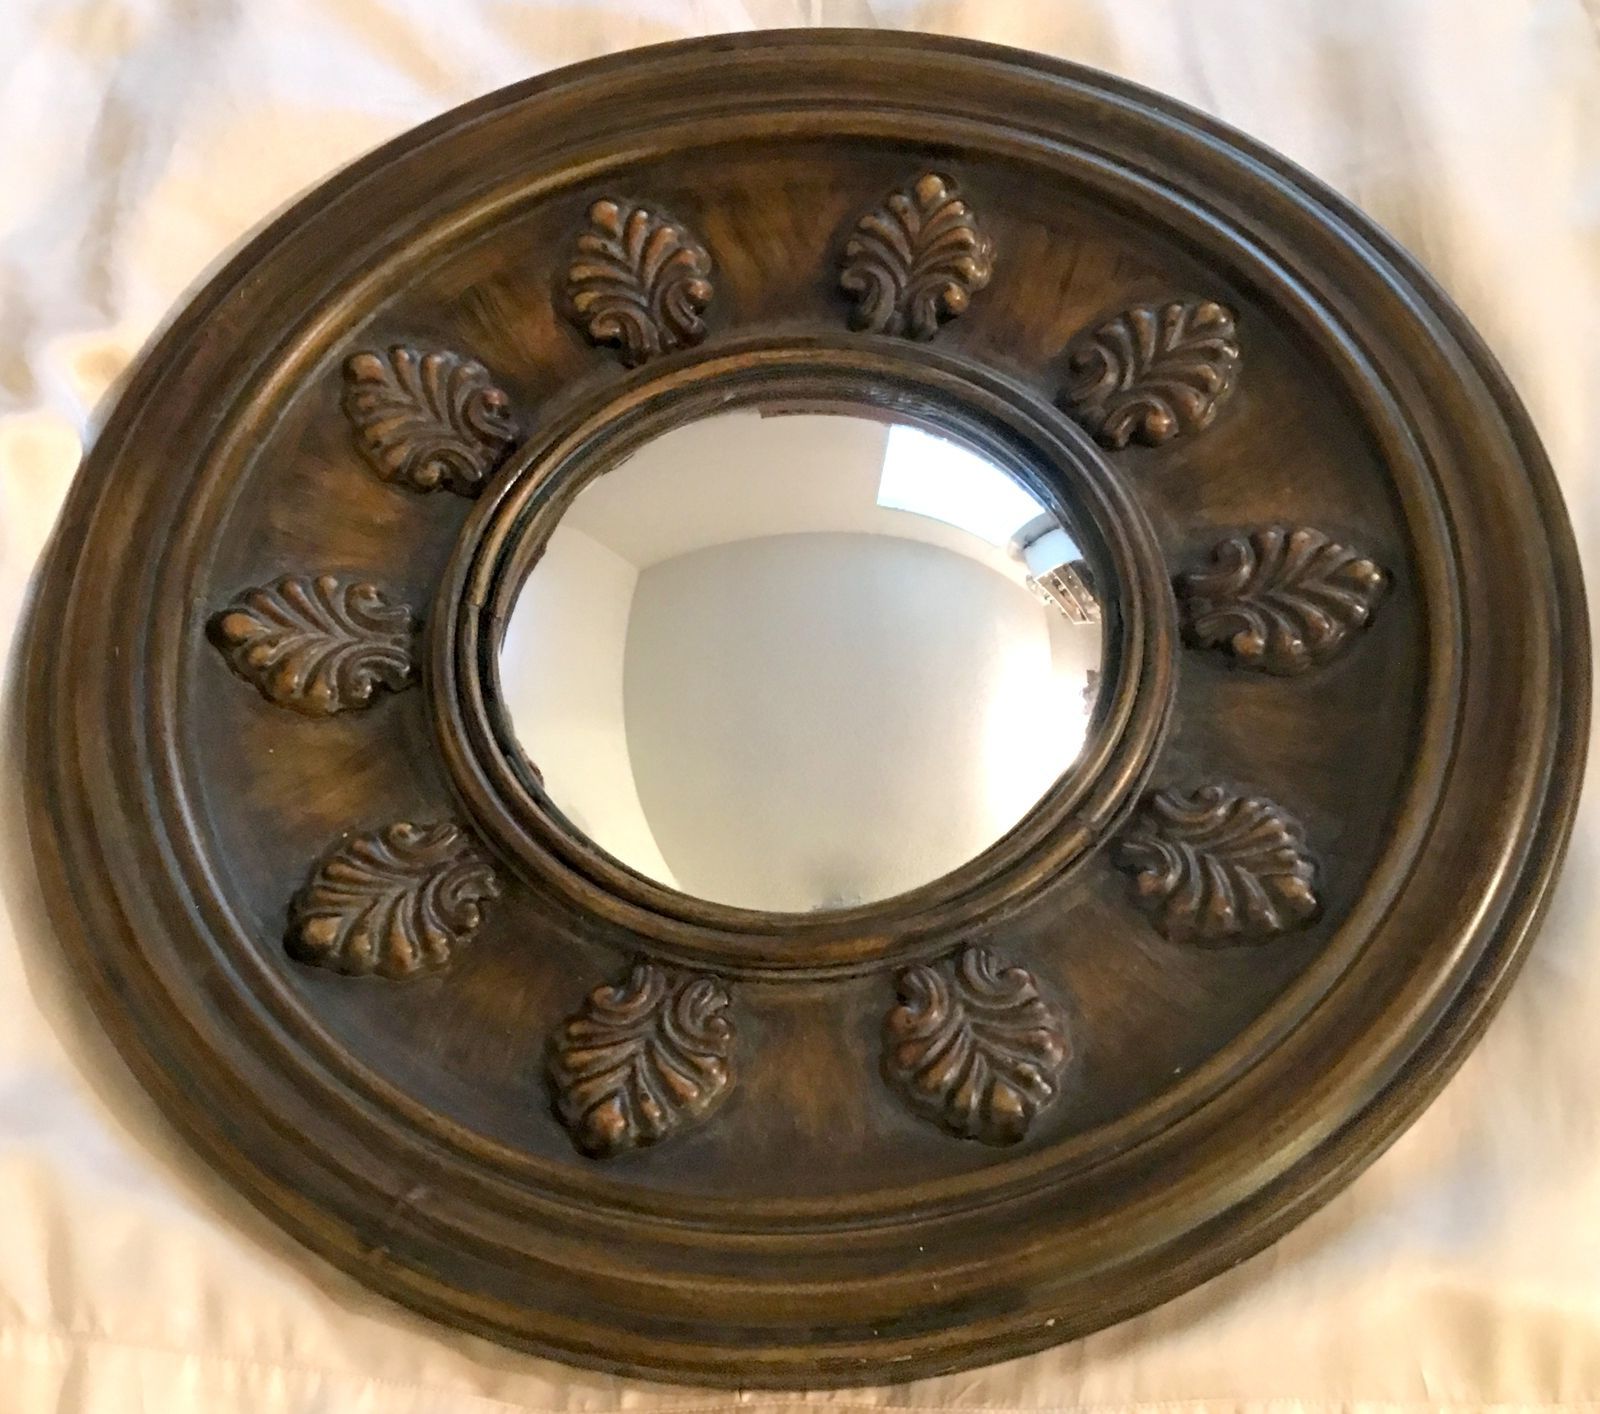 Brown Leather Round Wall Mirrors Intended For Well Known Round Convex Mirror Decorative Wall Mirror Tuscan Style Brown Metal (View 10 of 15)